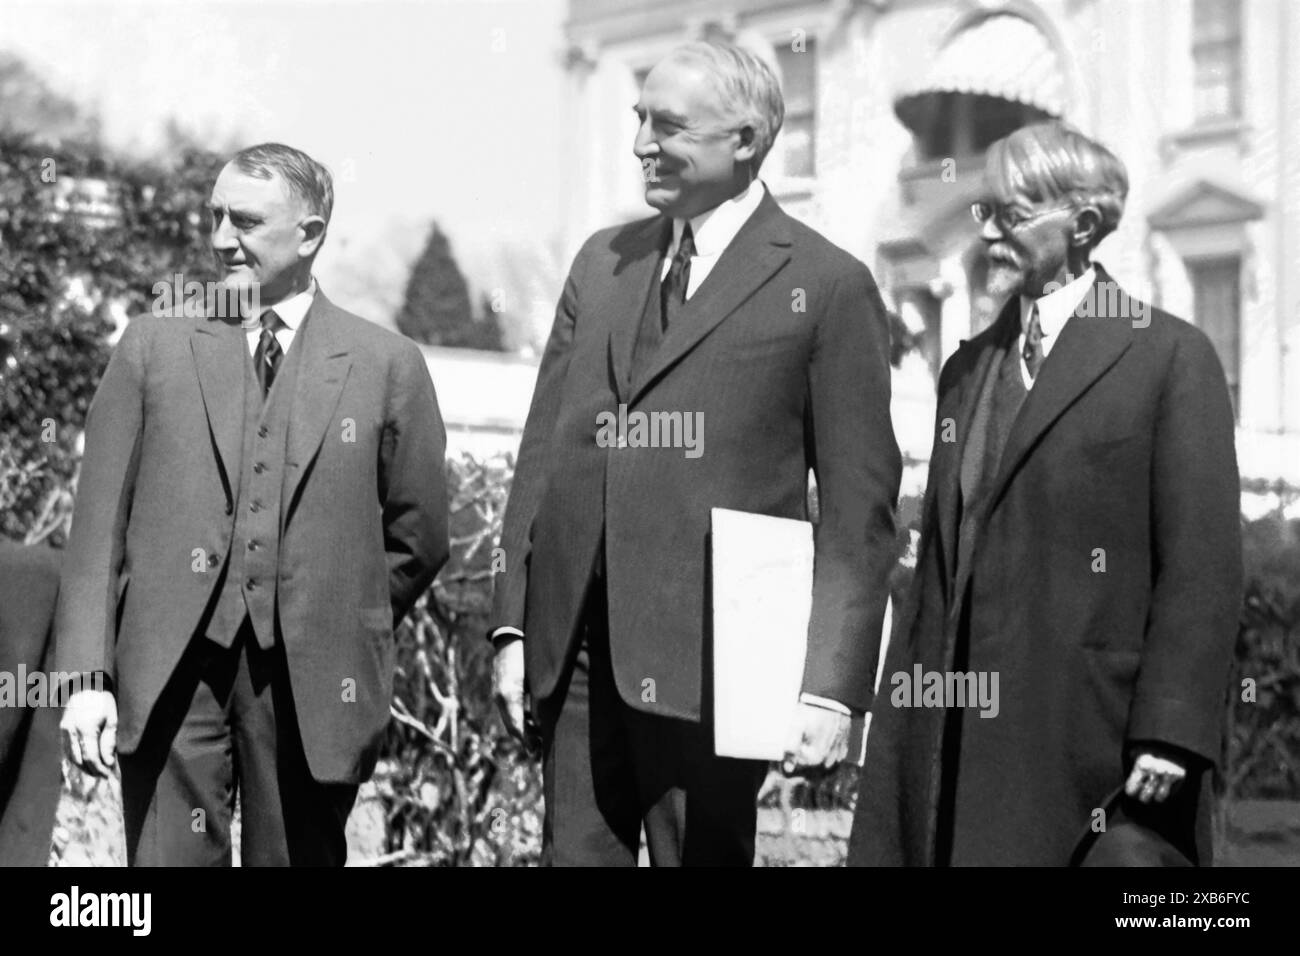 Dr. Charles Mayo (co-founder of the Mayo Clinic), President Warren G. Harding, and Dr. Charles E. Sawyer (Physician to the President) at the White House in Washington, D.C., on May 25, 1921. Stock Photo